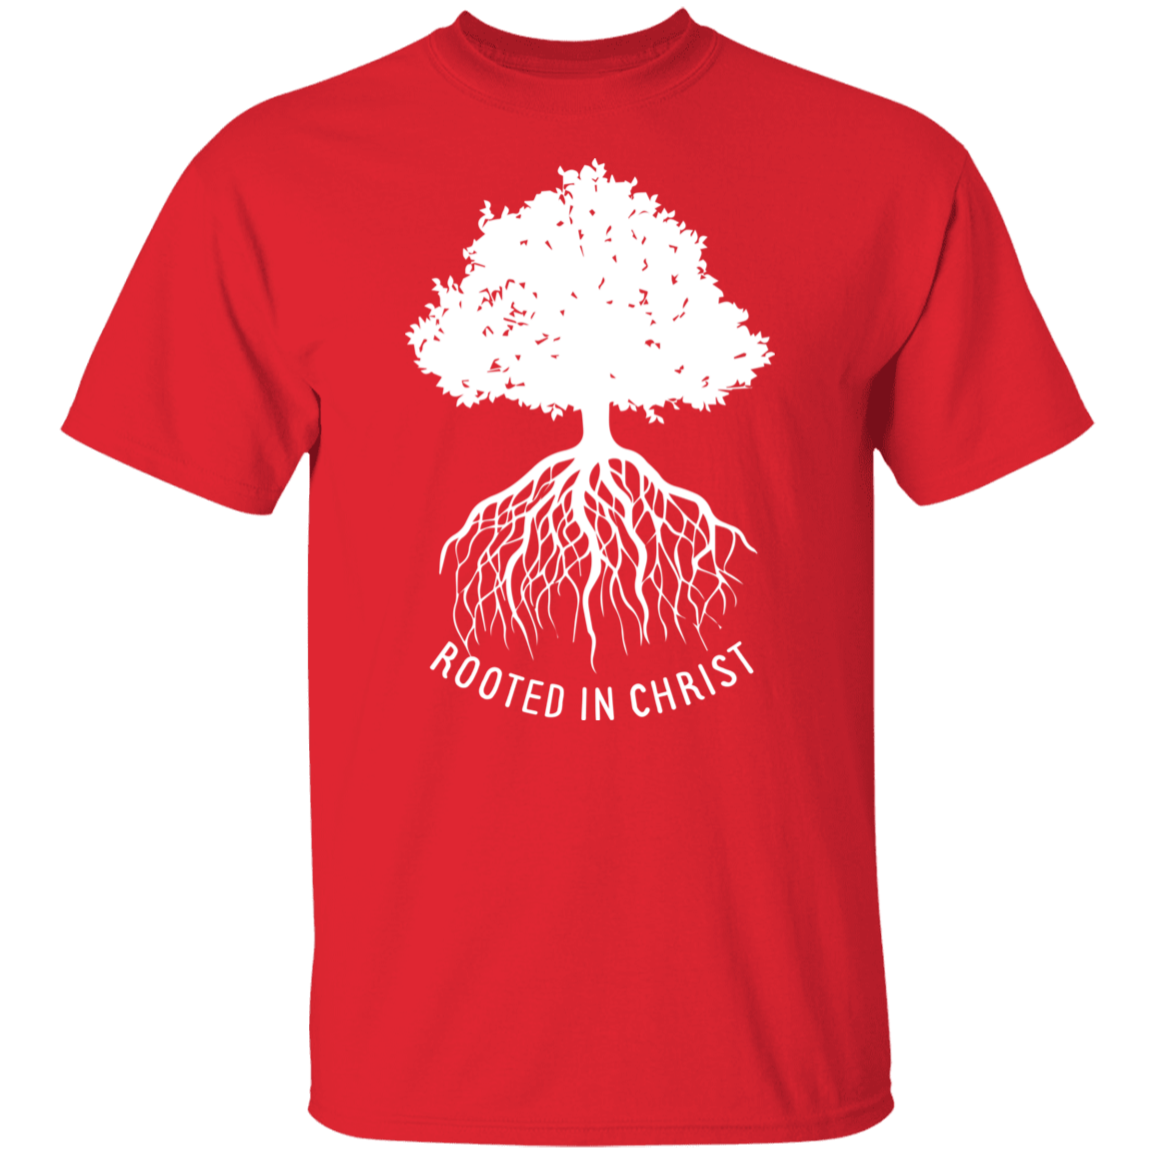 Rooted In Christ